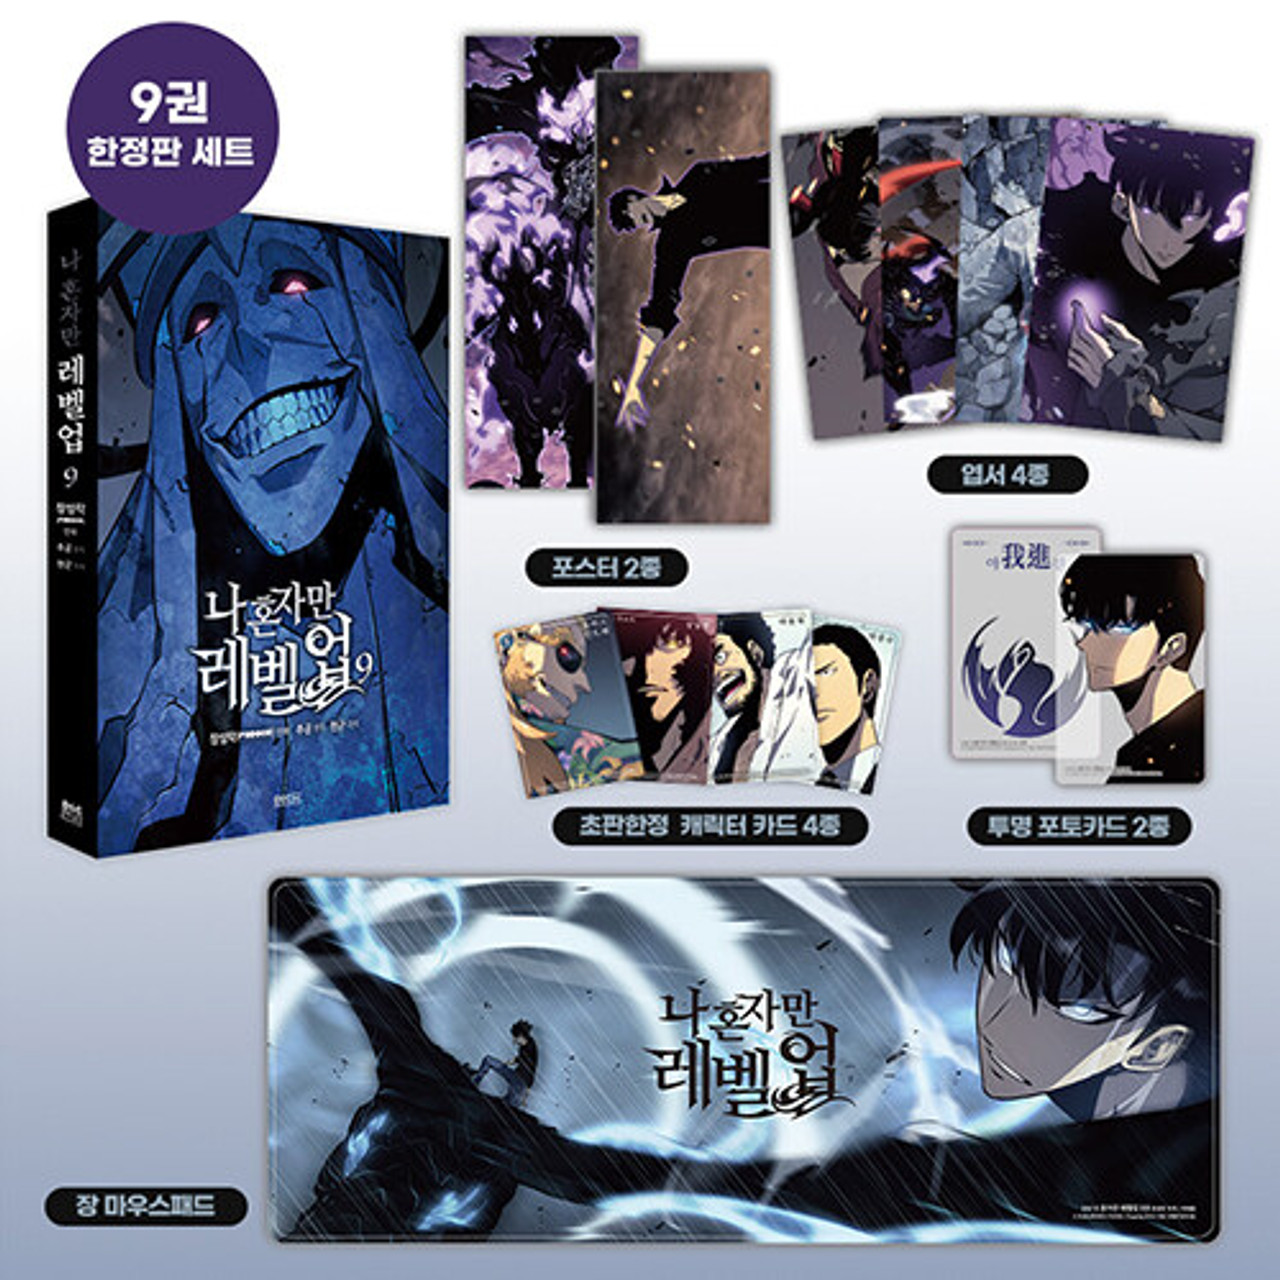 Solo Leveling Vol. 9 LIMITED EDITION